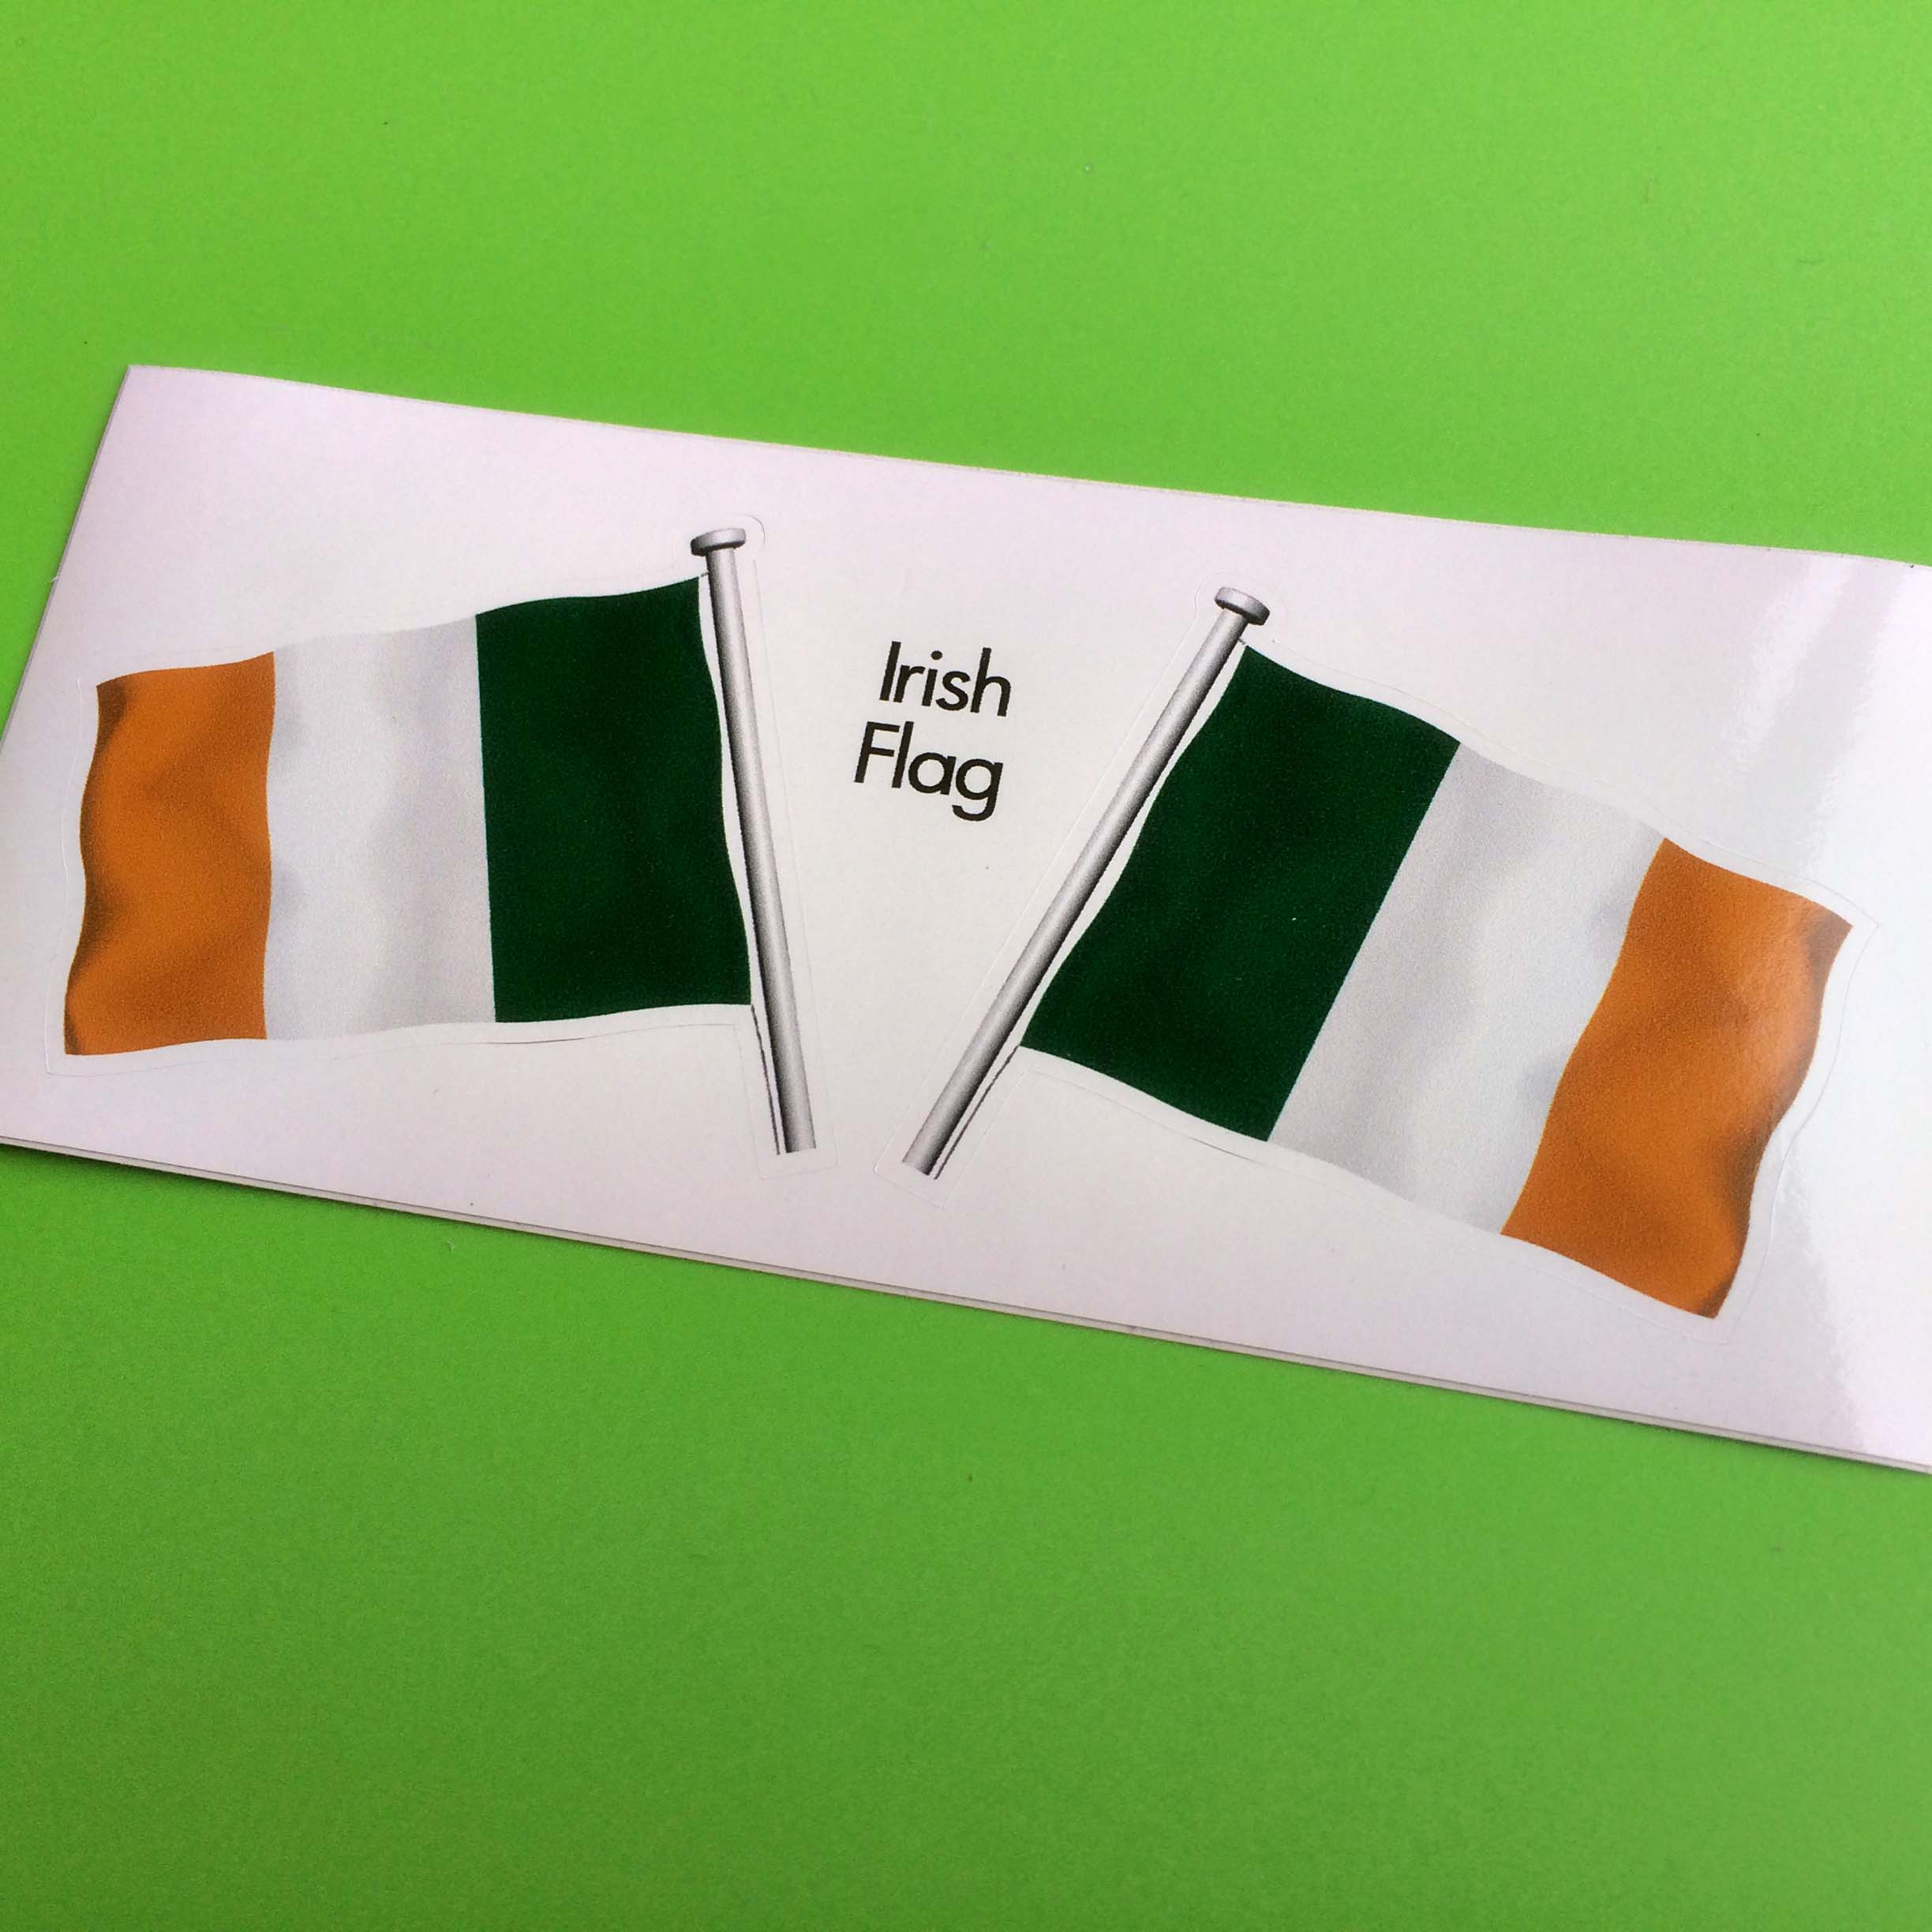 IRISH IRELAND FLAG AND POLE STICKERS. A vertical tricolour of green, white and orange. A wavy flag of Ireland on a pole.